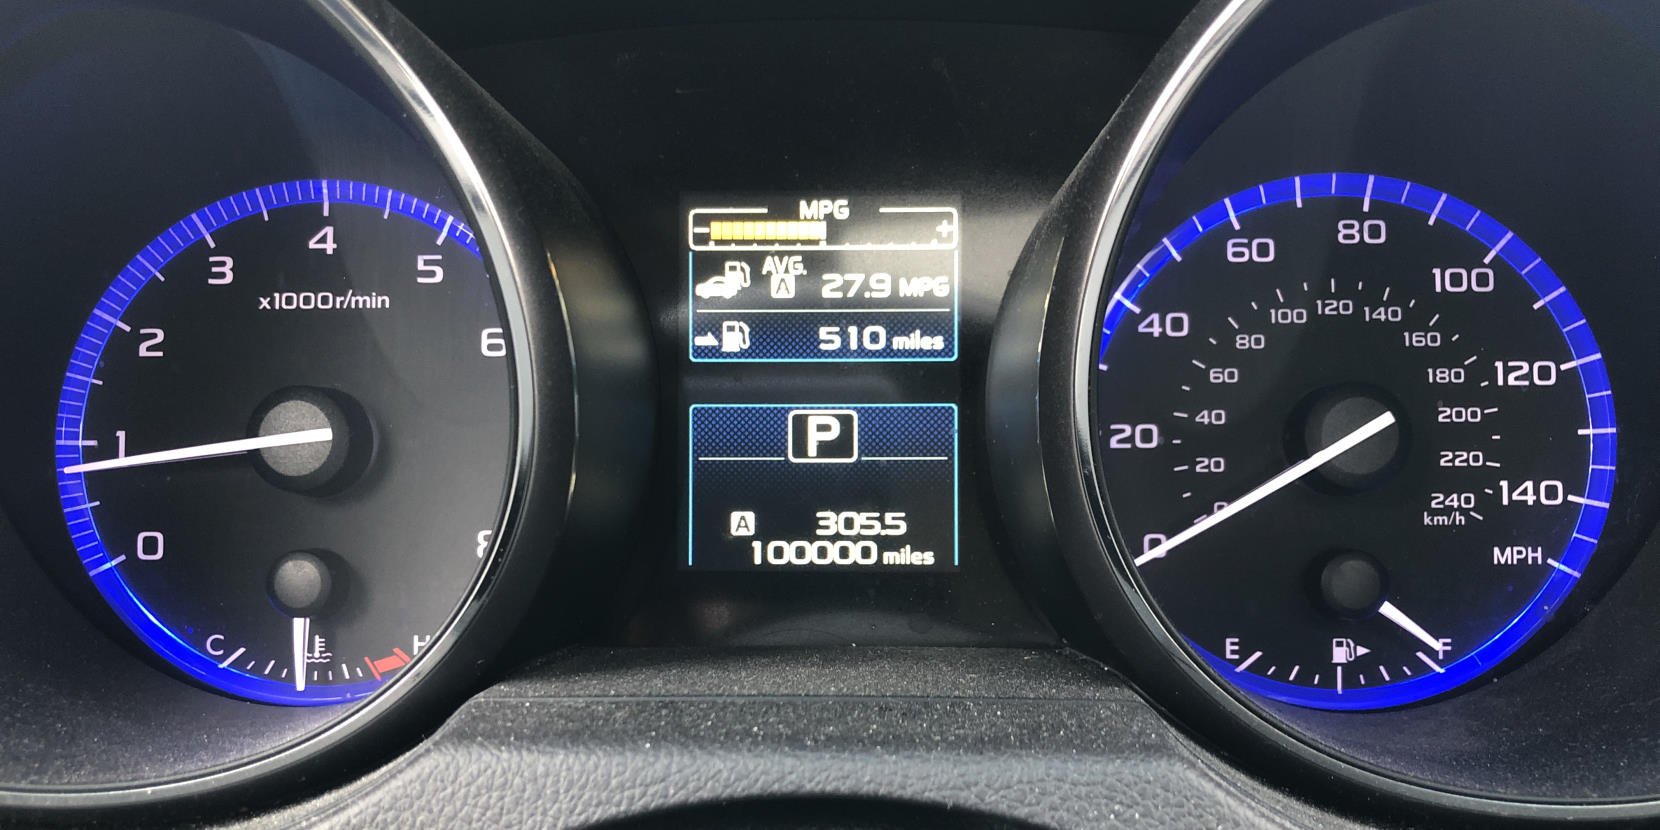 My odometer, showing 100000 miles.